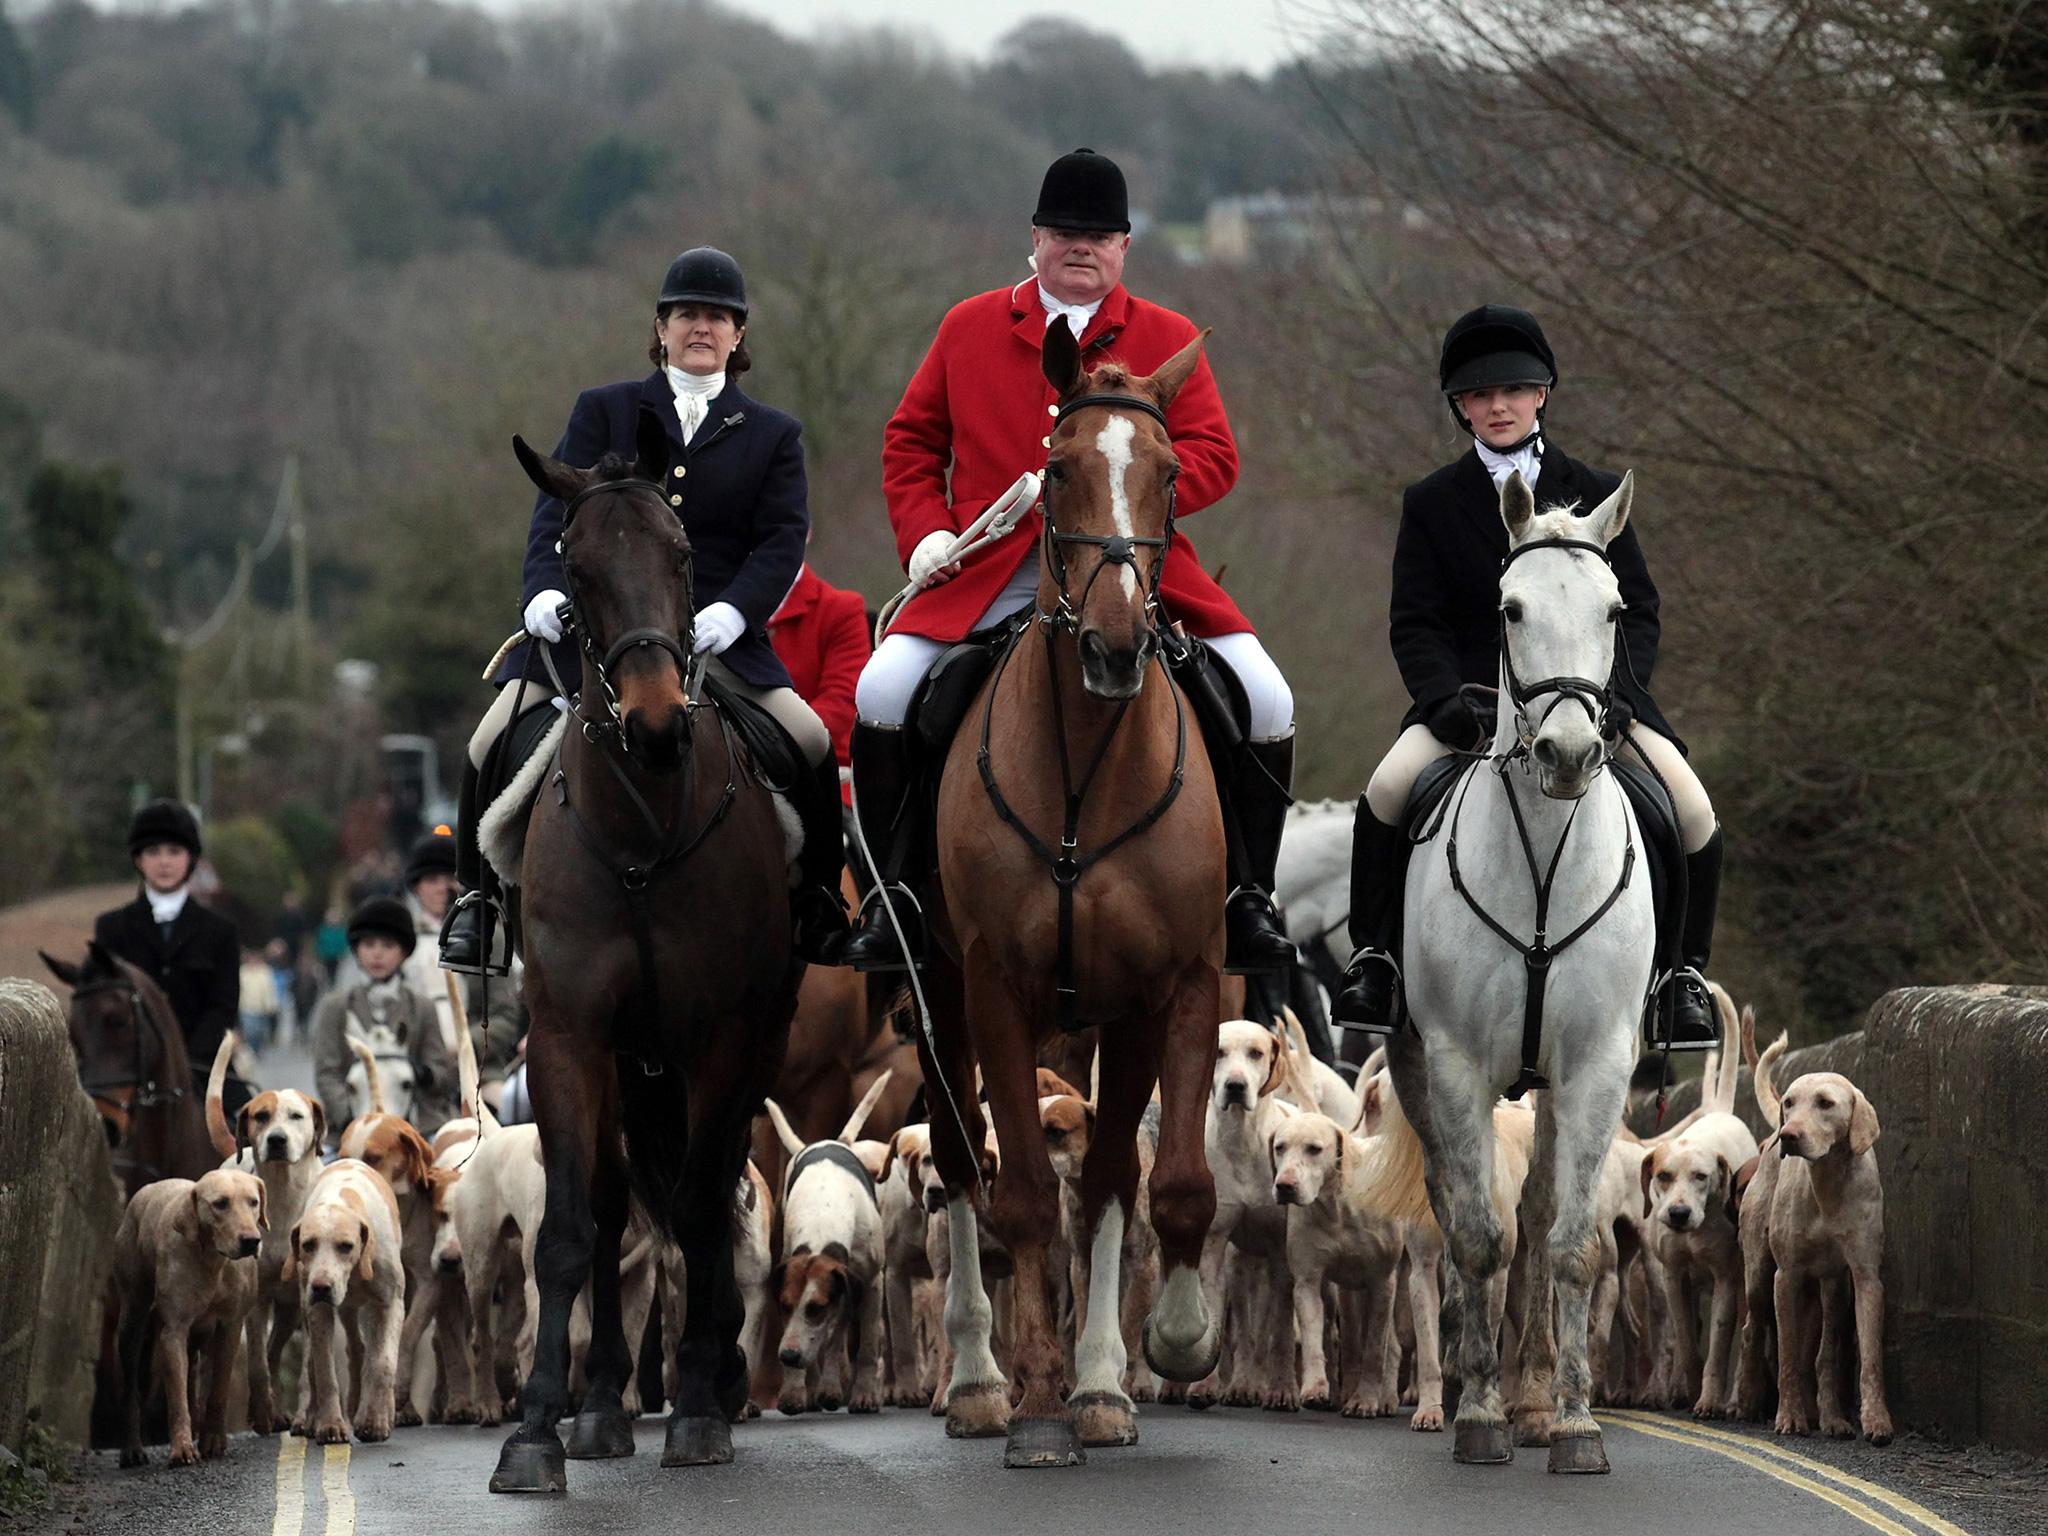 Fox hunting has been banned in the UK since 2004